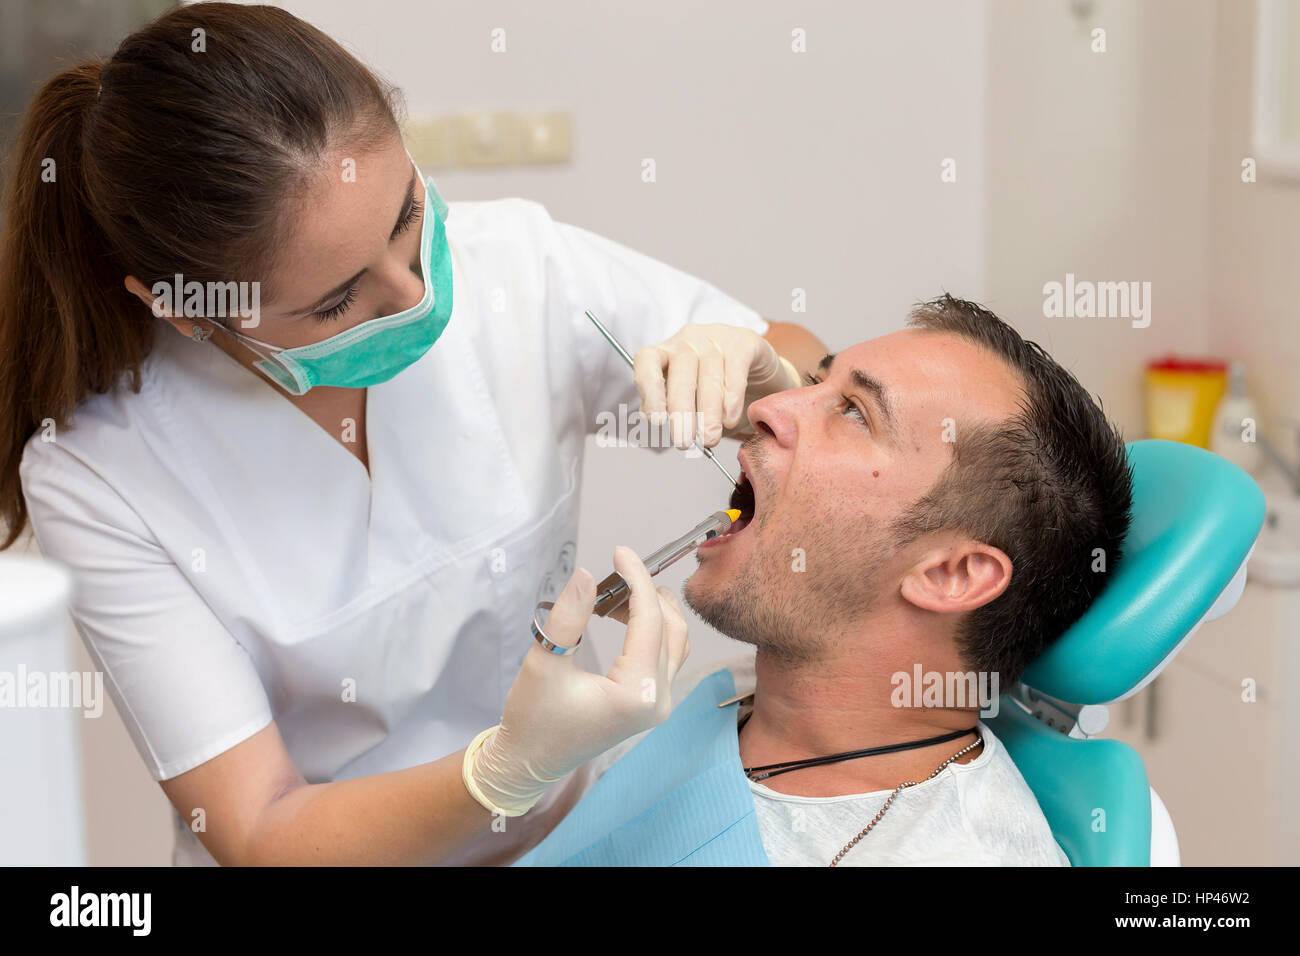 Anesthesia Adult Patient Mask Stock Photos & Anesthesia Adult Patient